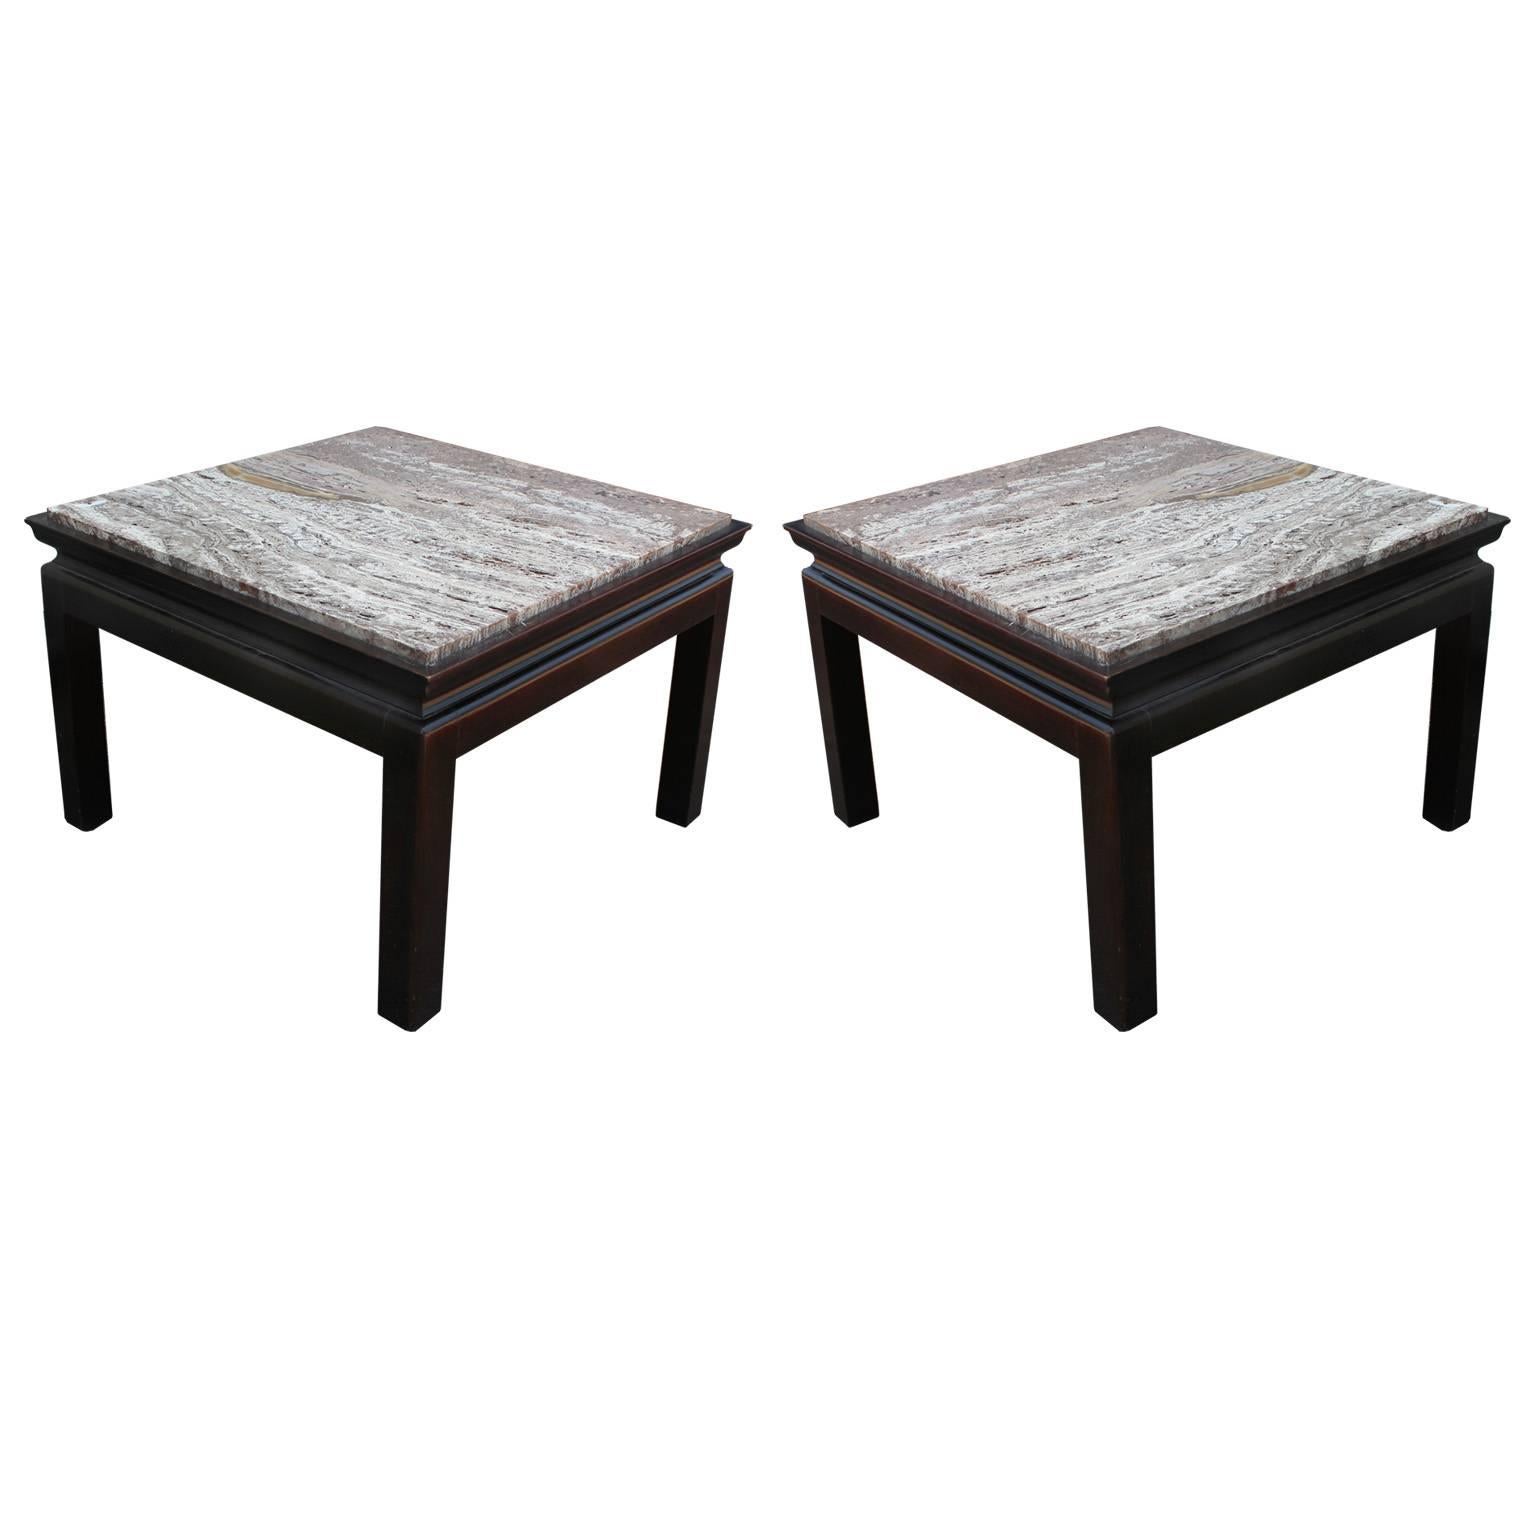 Elegant Pair of Modern Square Marble Top Widdicomb Side Tables with Walnut Bases